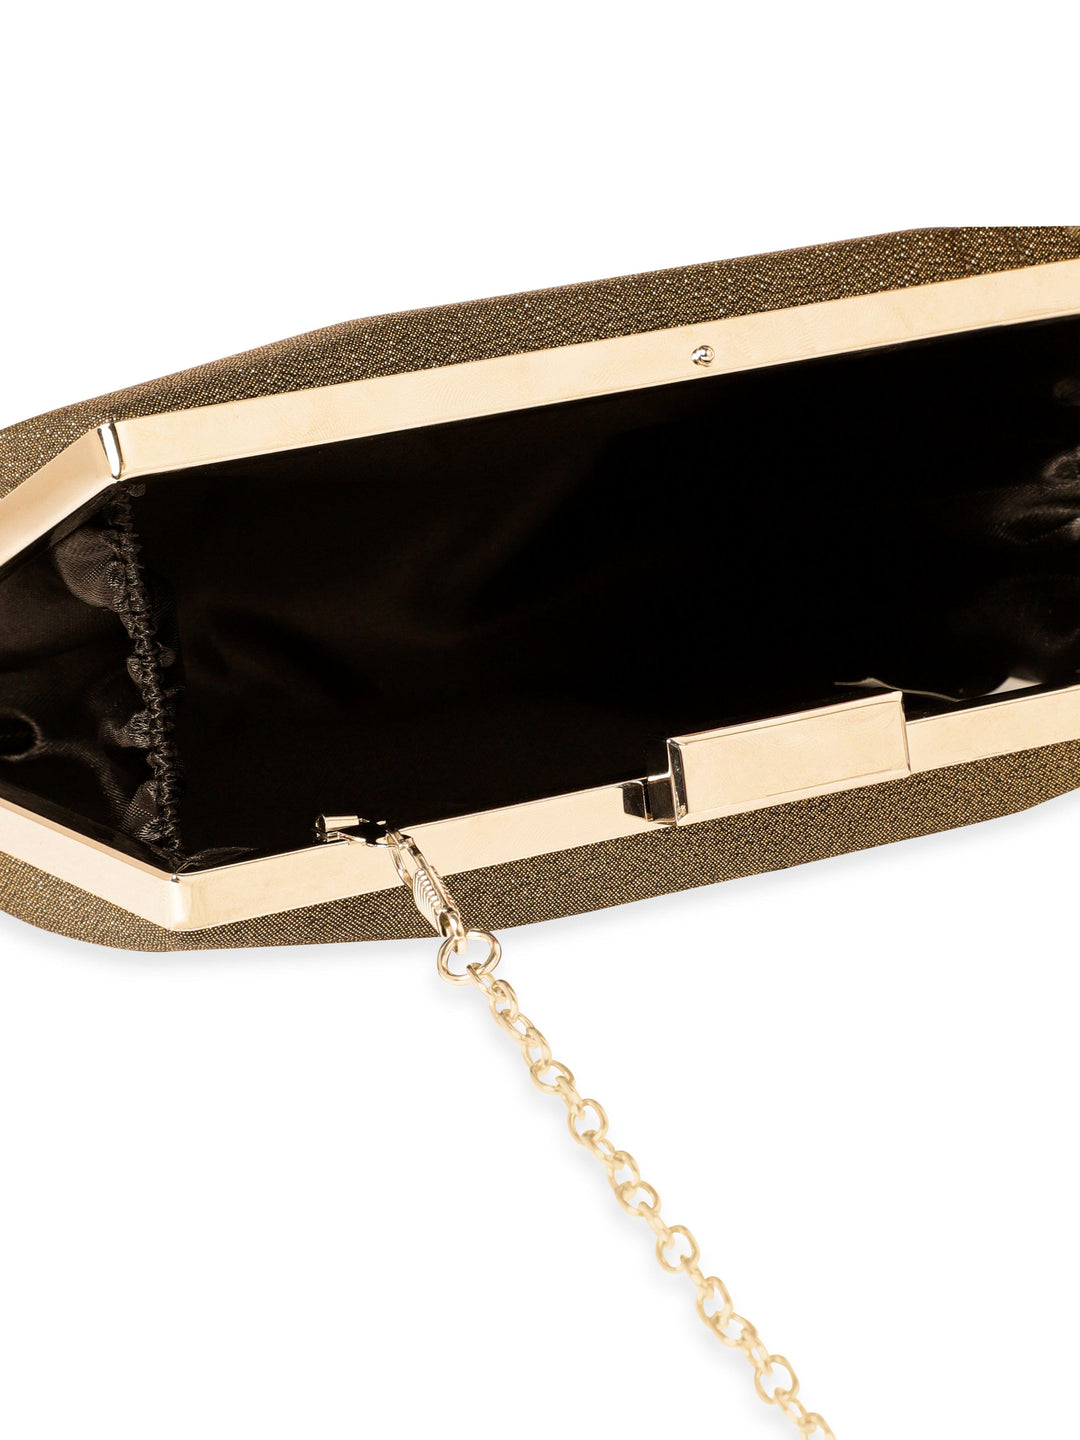 Rubans Gilded Glamour Handcrafted Shimmery Clutch Bag Handbag, Wallet Accessories & Clutches